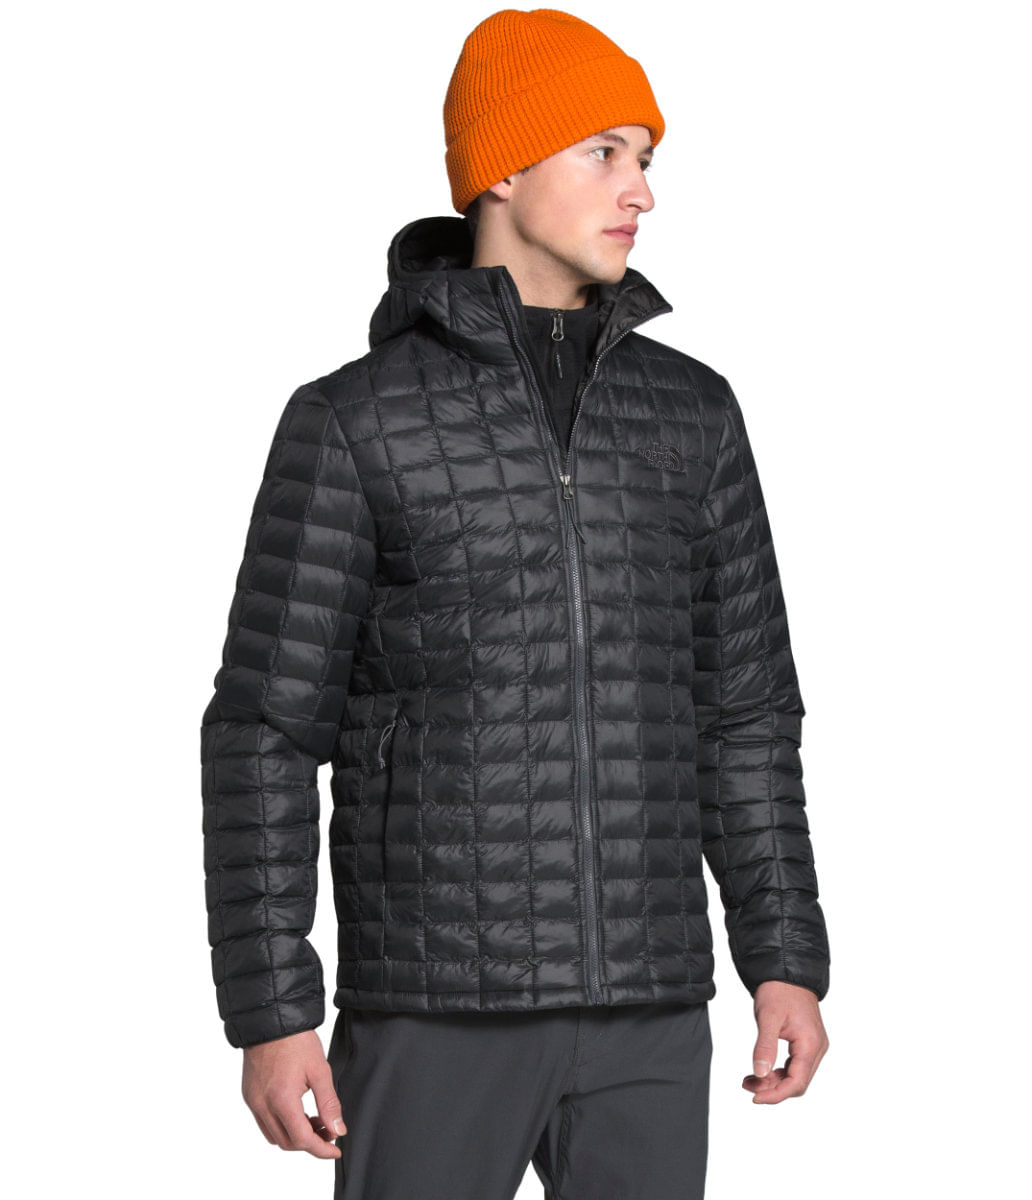 north face thermoball hooded jacket men's